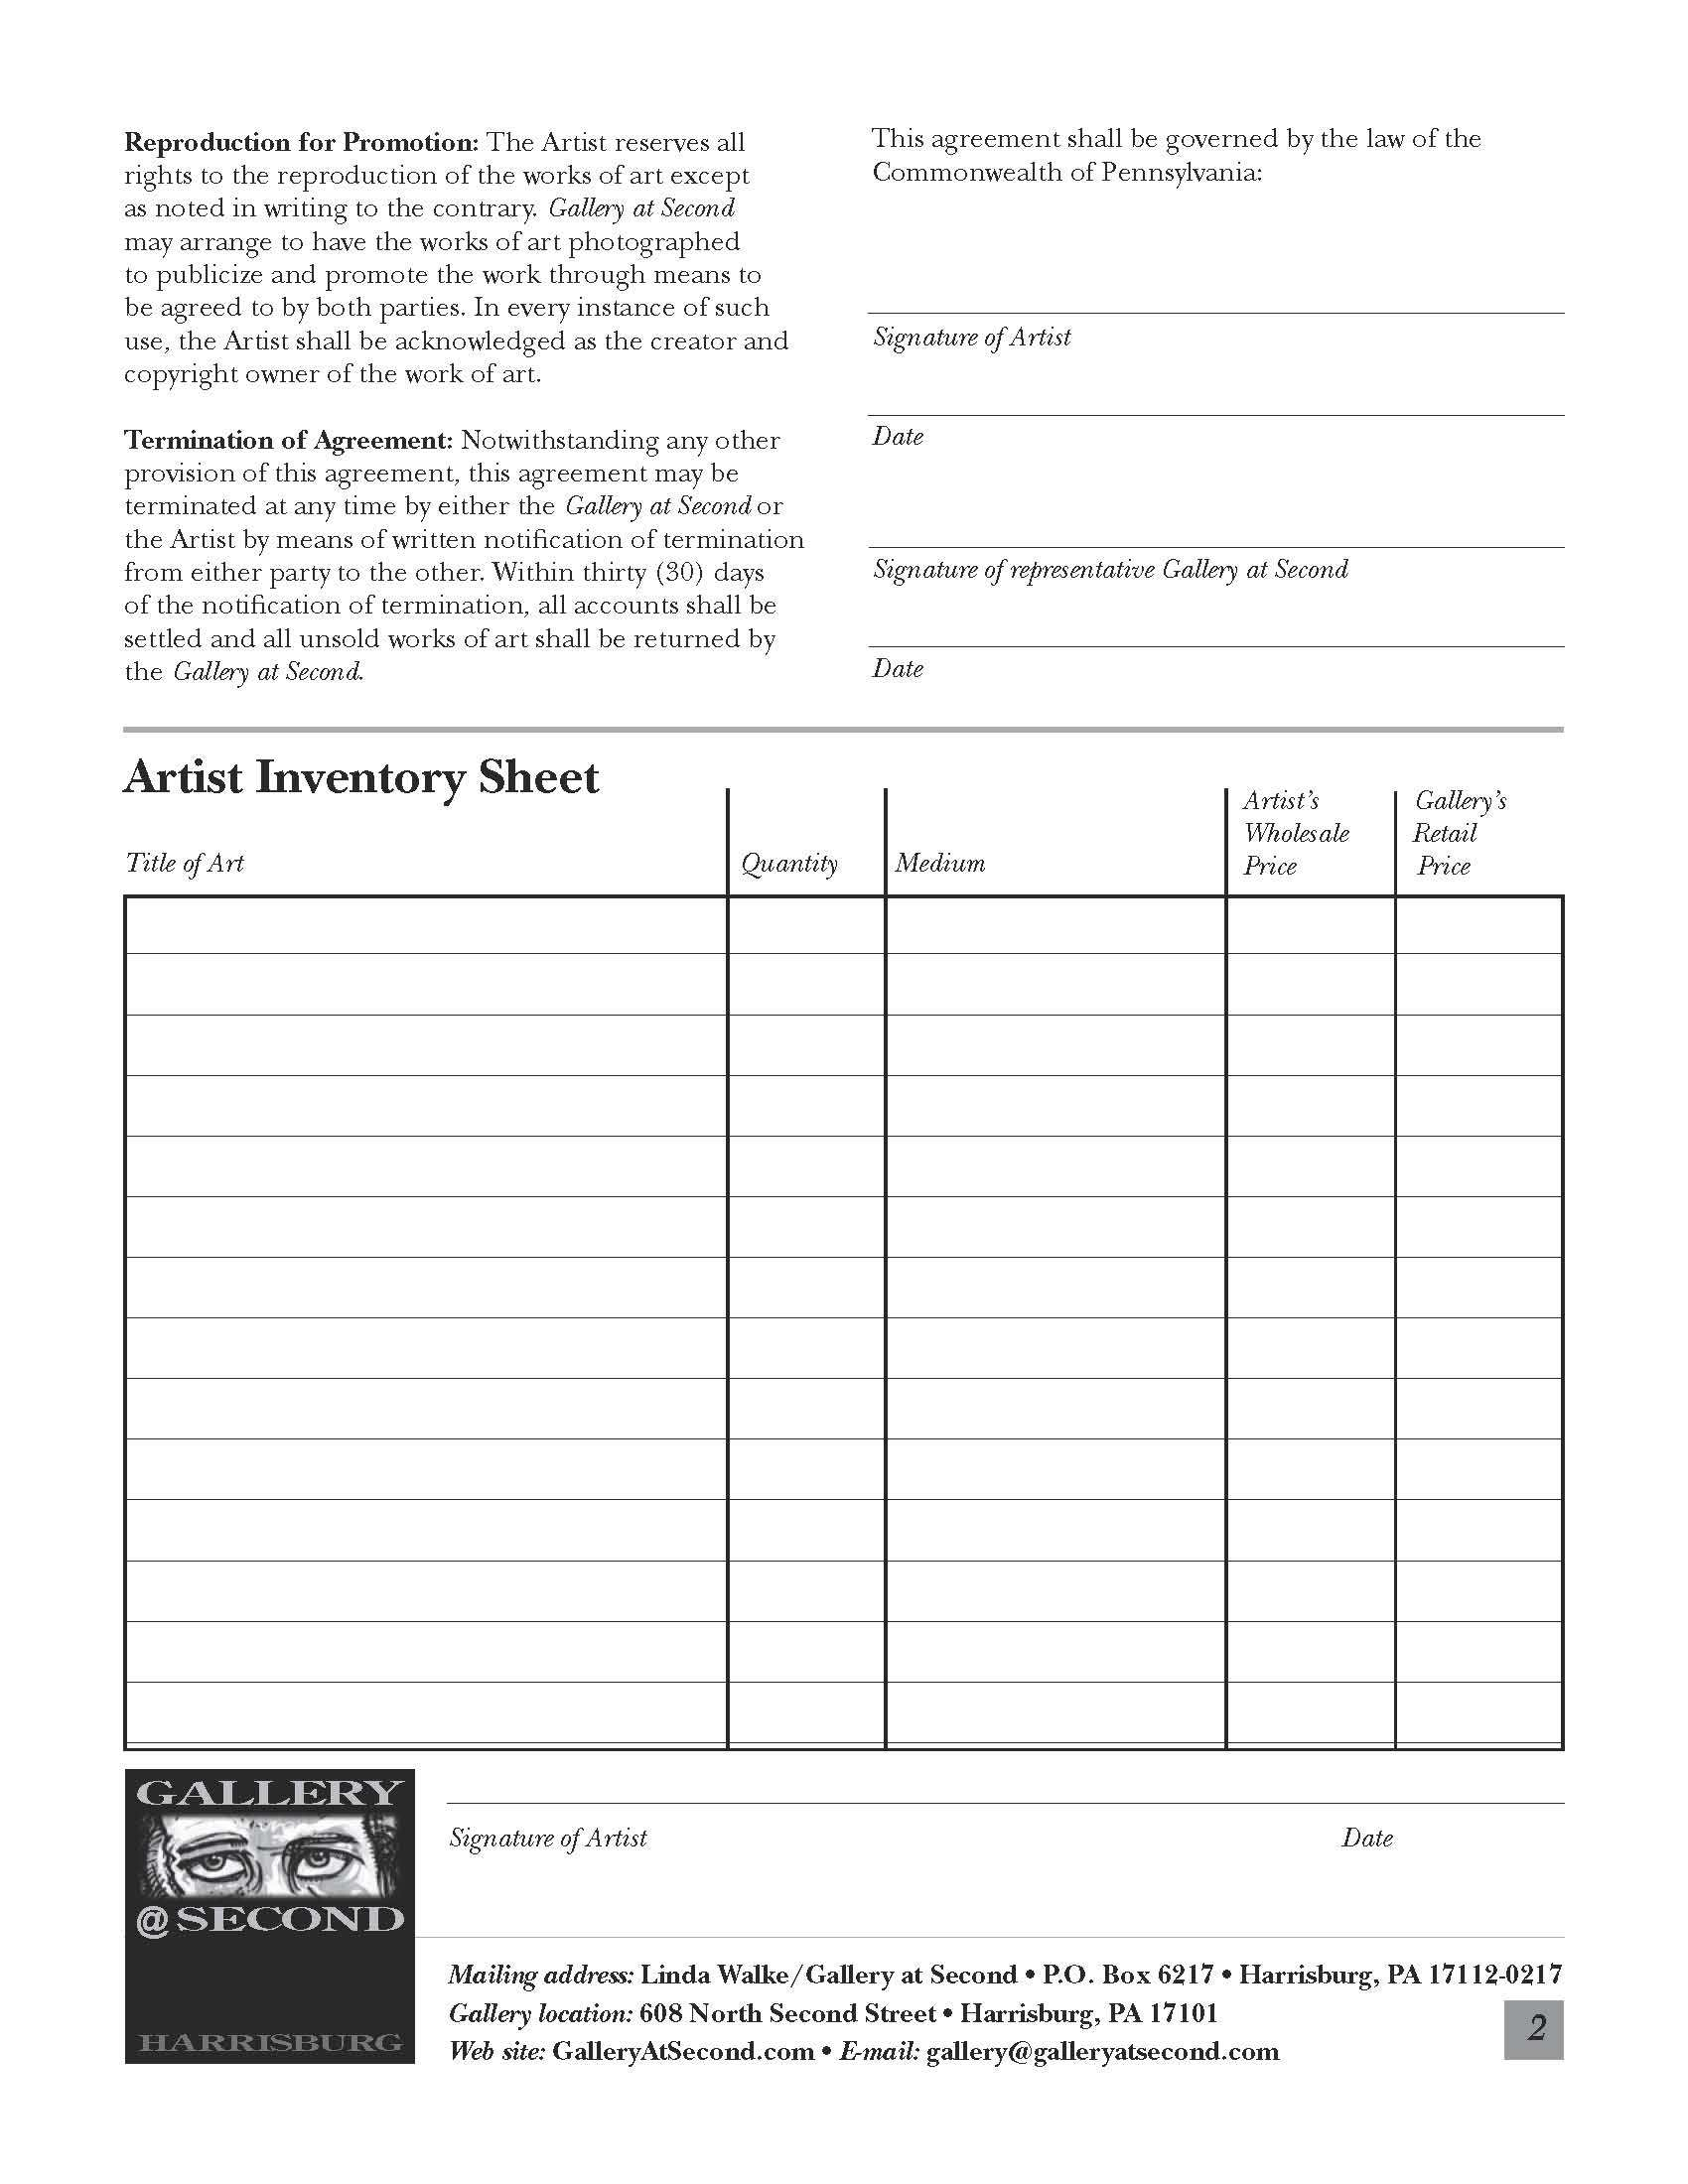 Inventory Consignment Agreement Consignment Agreement Pdf 79755 Agreement Consignment Agreement Form